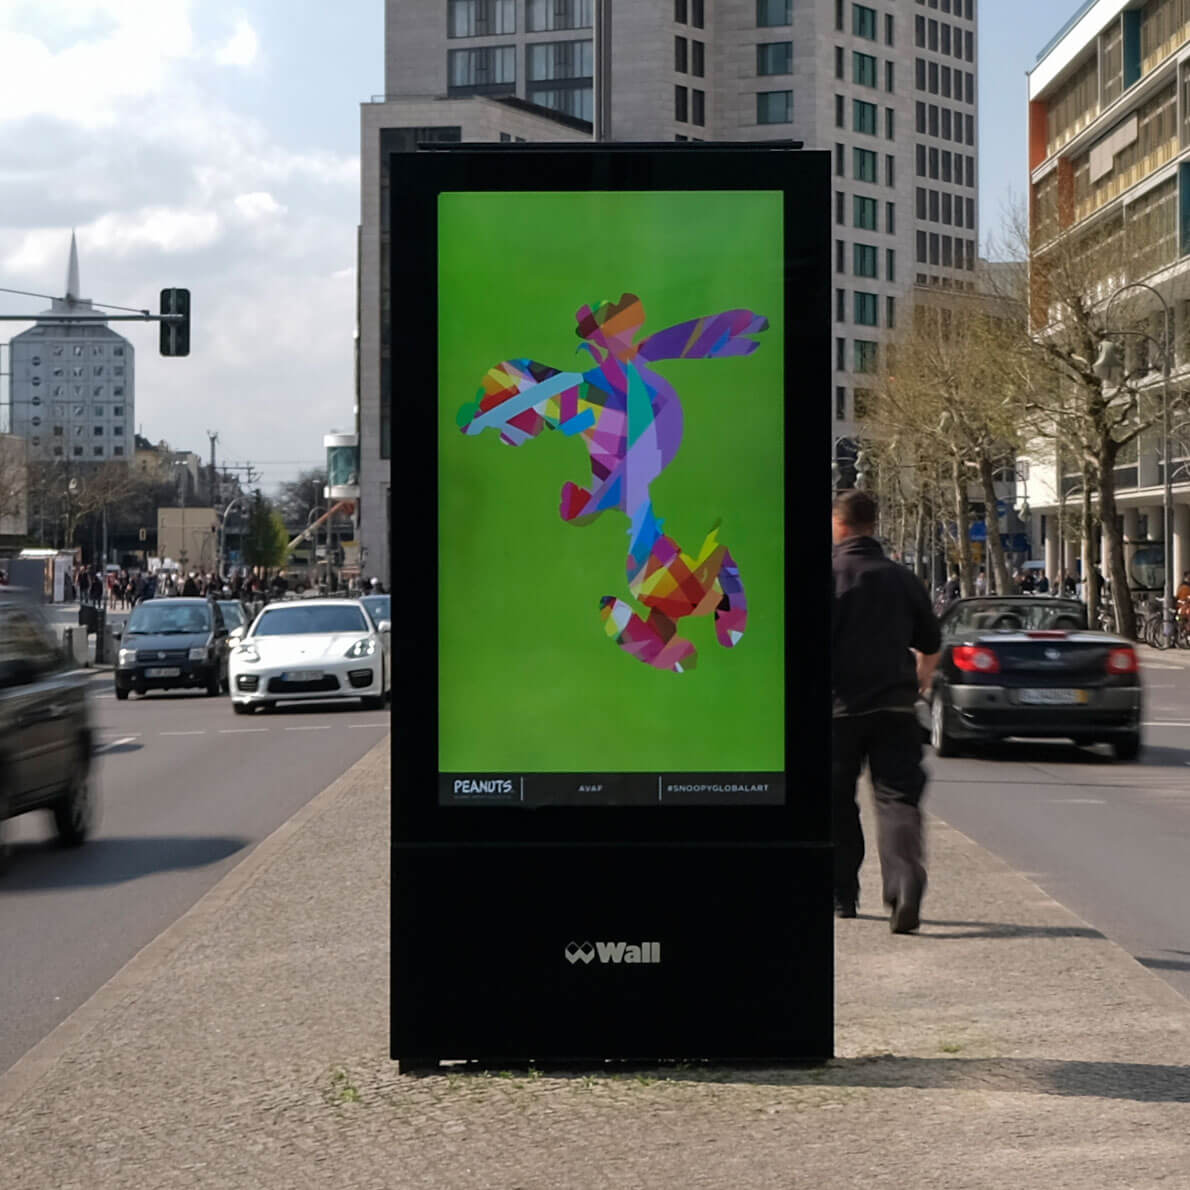 A large LED display showcasing a colourful image on a sidewalk in a busy city.